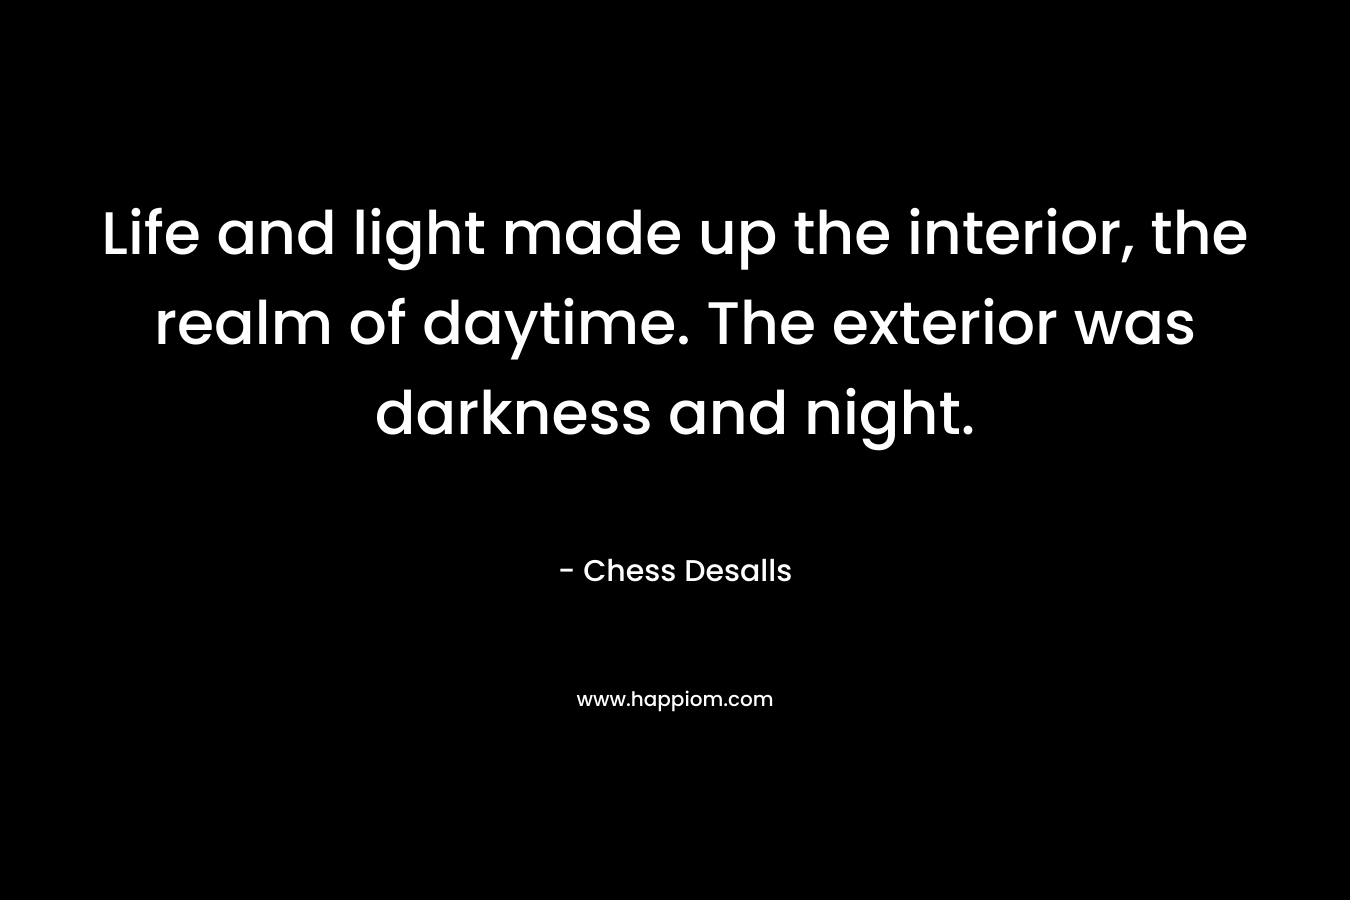 Life and light made up the interior, the realm of daytime. The exterior was darkness and night. – Chess Desalls